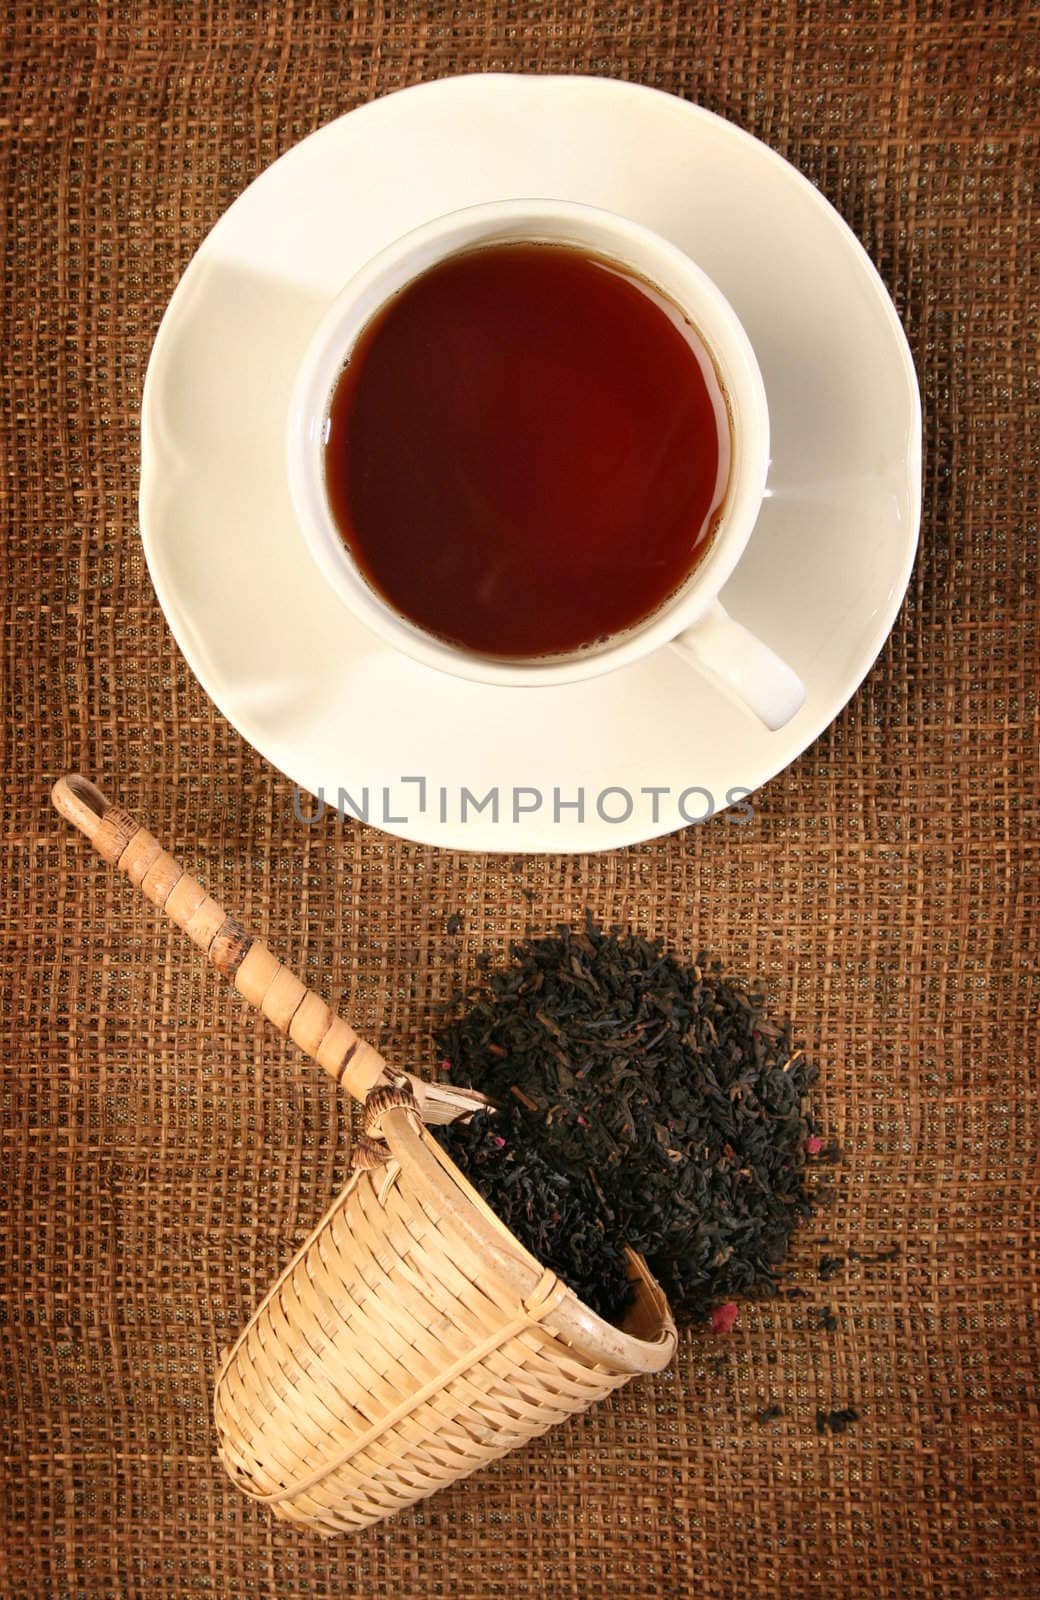 A wicker scoop with herb tea leaves and a cup of tea. More in gallery